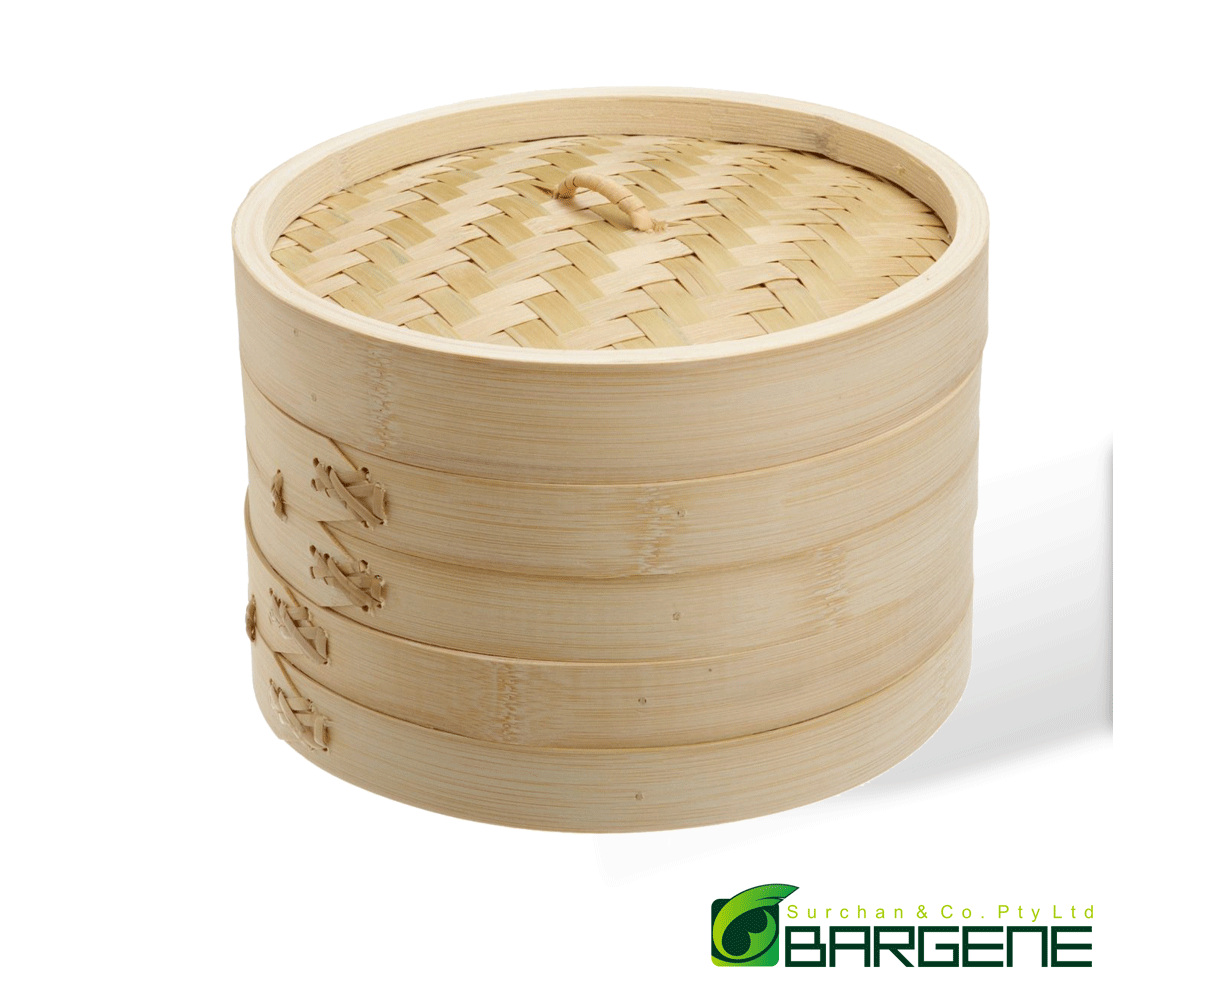 6 Inch Bamboo Steamer Set-2 Steamer Baskets With 1 Lid